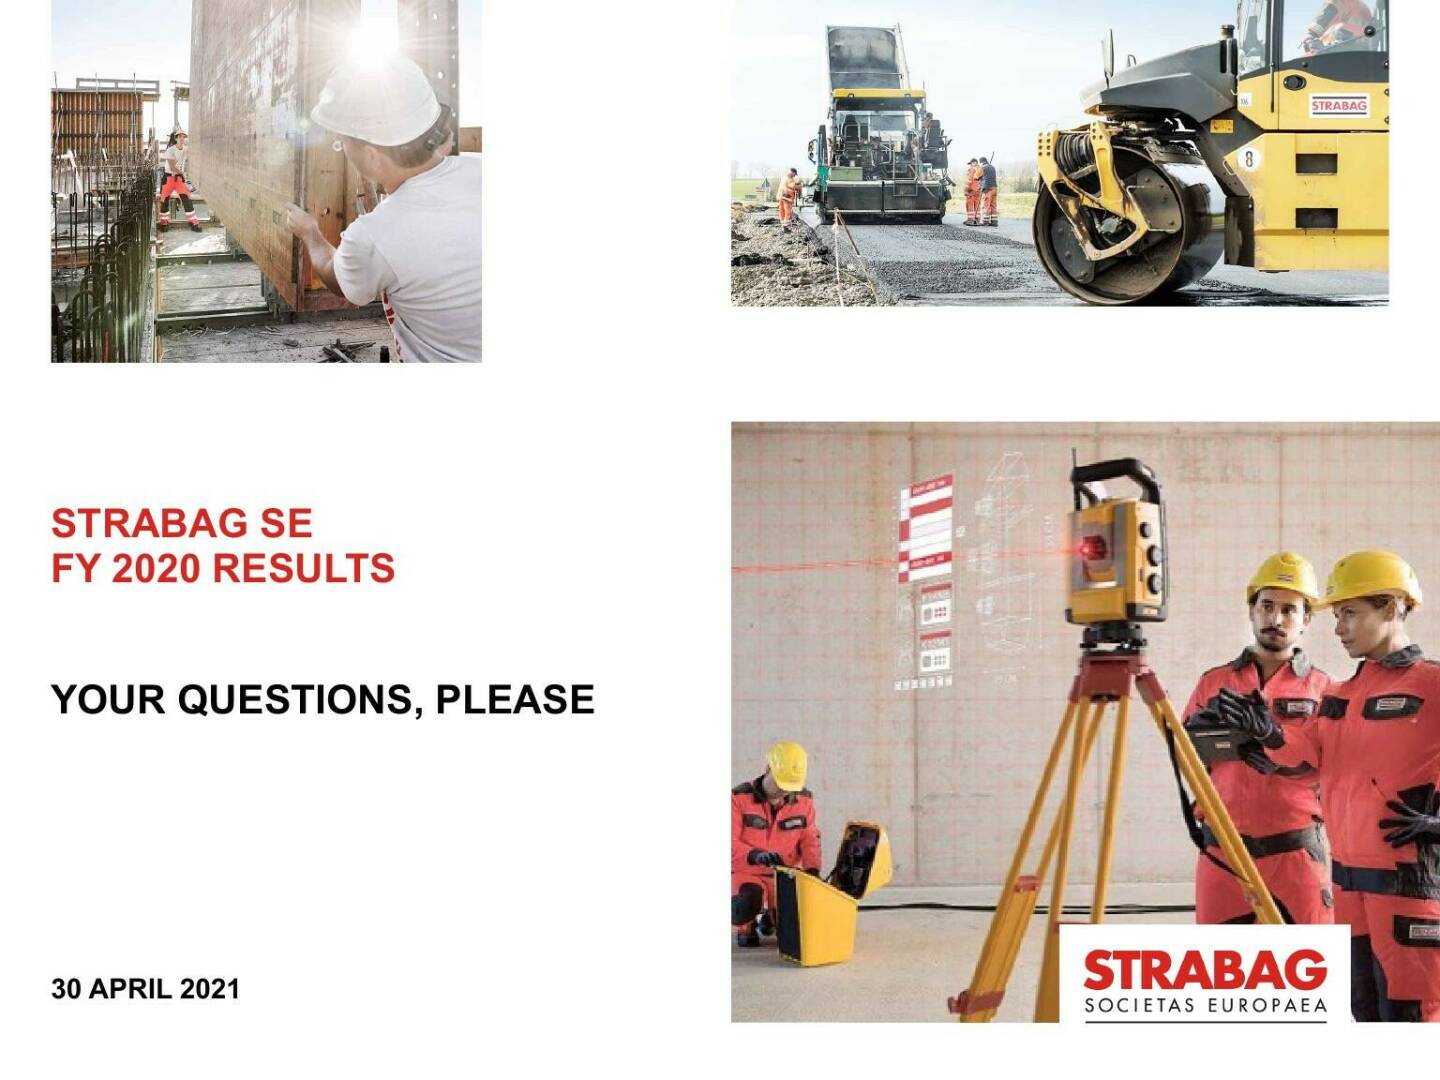 Strabag - Your questions, please